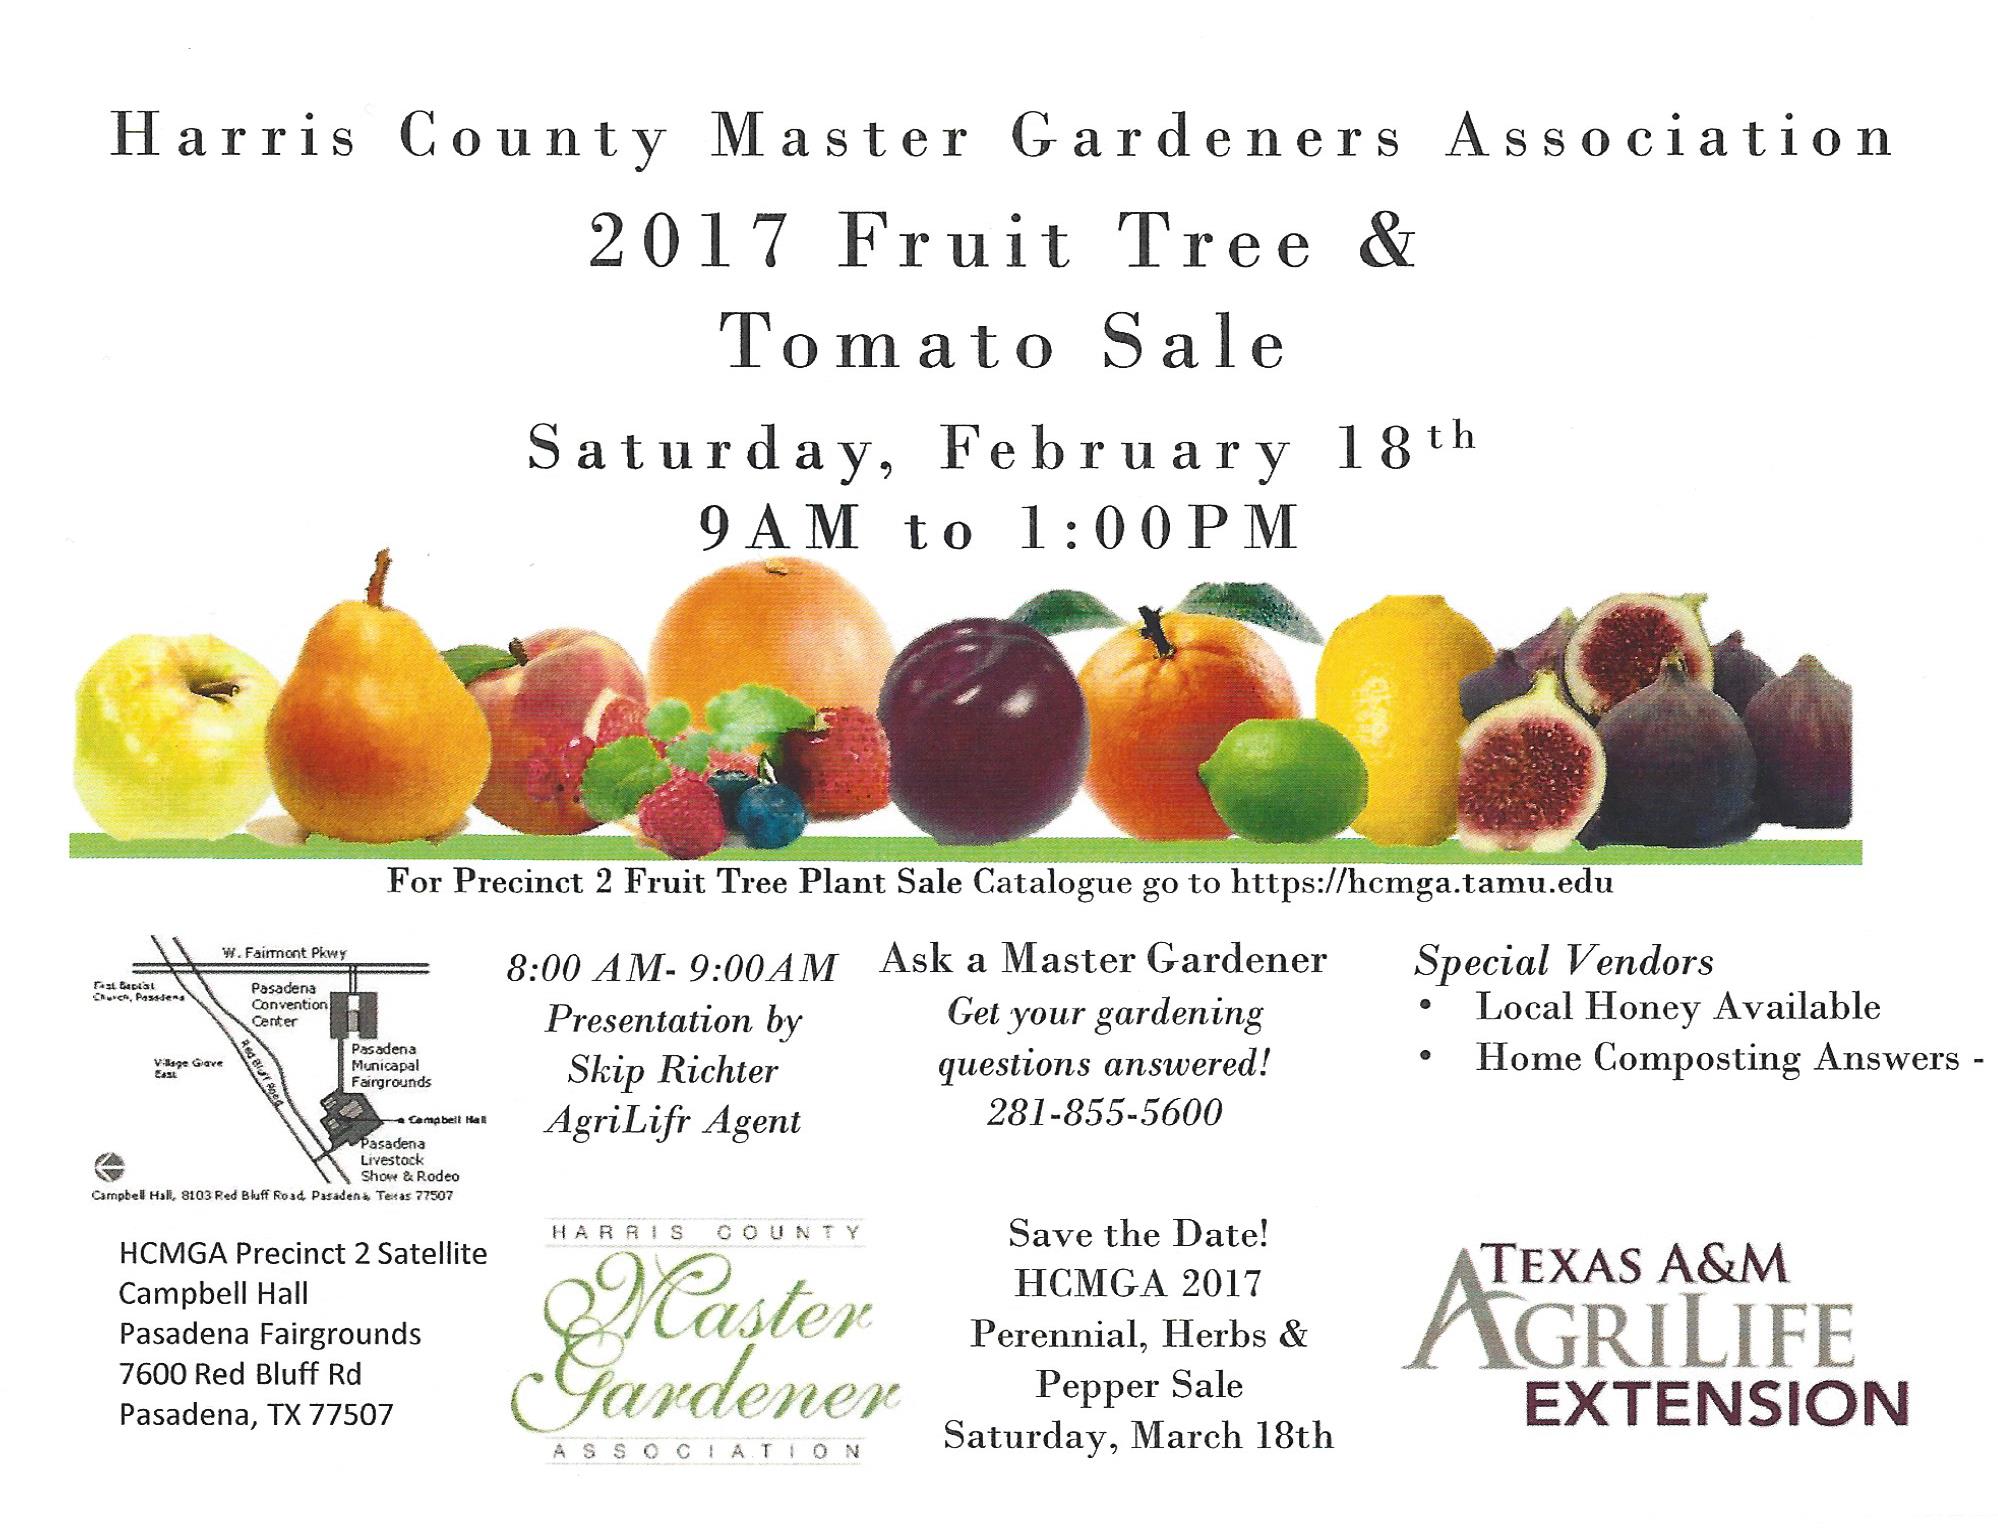 Harris County Master Gardeners in Precinct 2 are having their annual Fruit Tree and Tomato Sale on Saturday February 18th from 9 AM to 1 PM.  There will be a presentation from 8-9 before the sale.  Please call 281-855-5600 to have any gardening questions or questions about the sale answered.  Sale is located at the Pasadena Fairgrounds  7600 Red Bluff Rd.  Pasadena, TX 77507